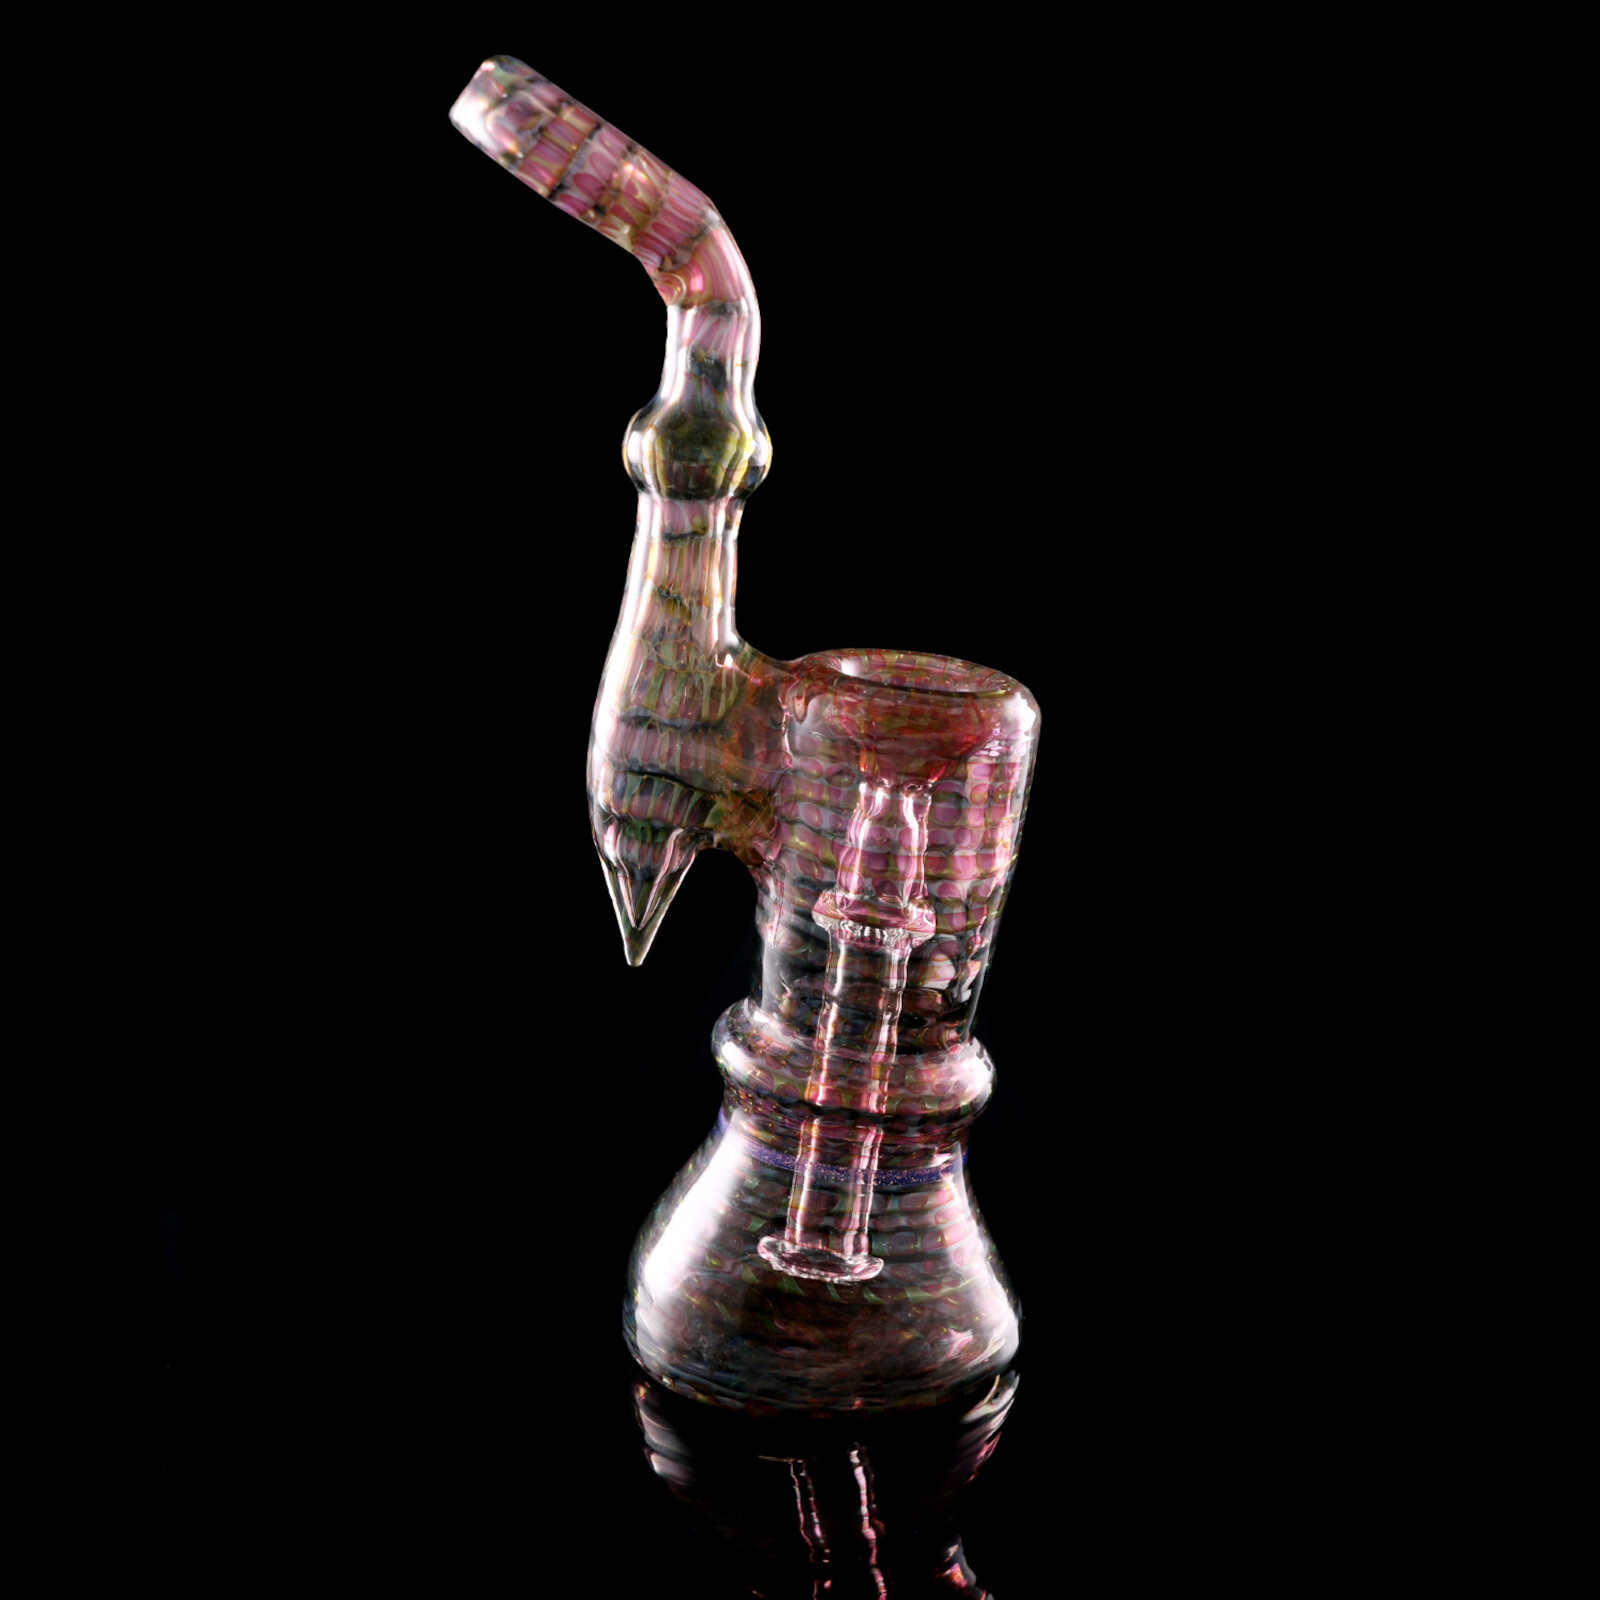 Woodchuck | Gold and Violett Fumed Bubbler